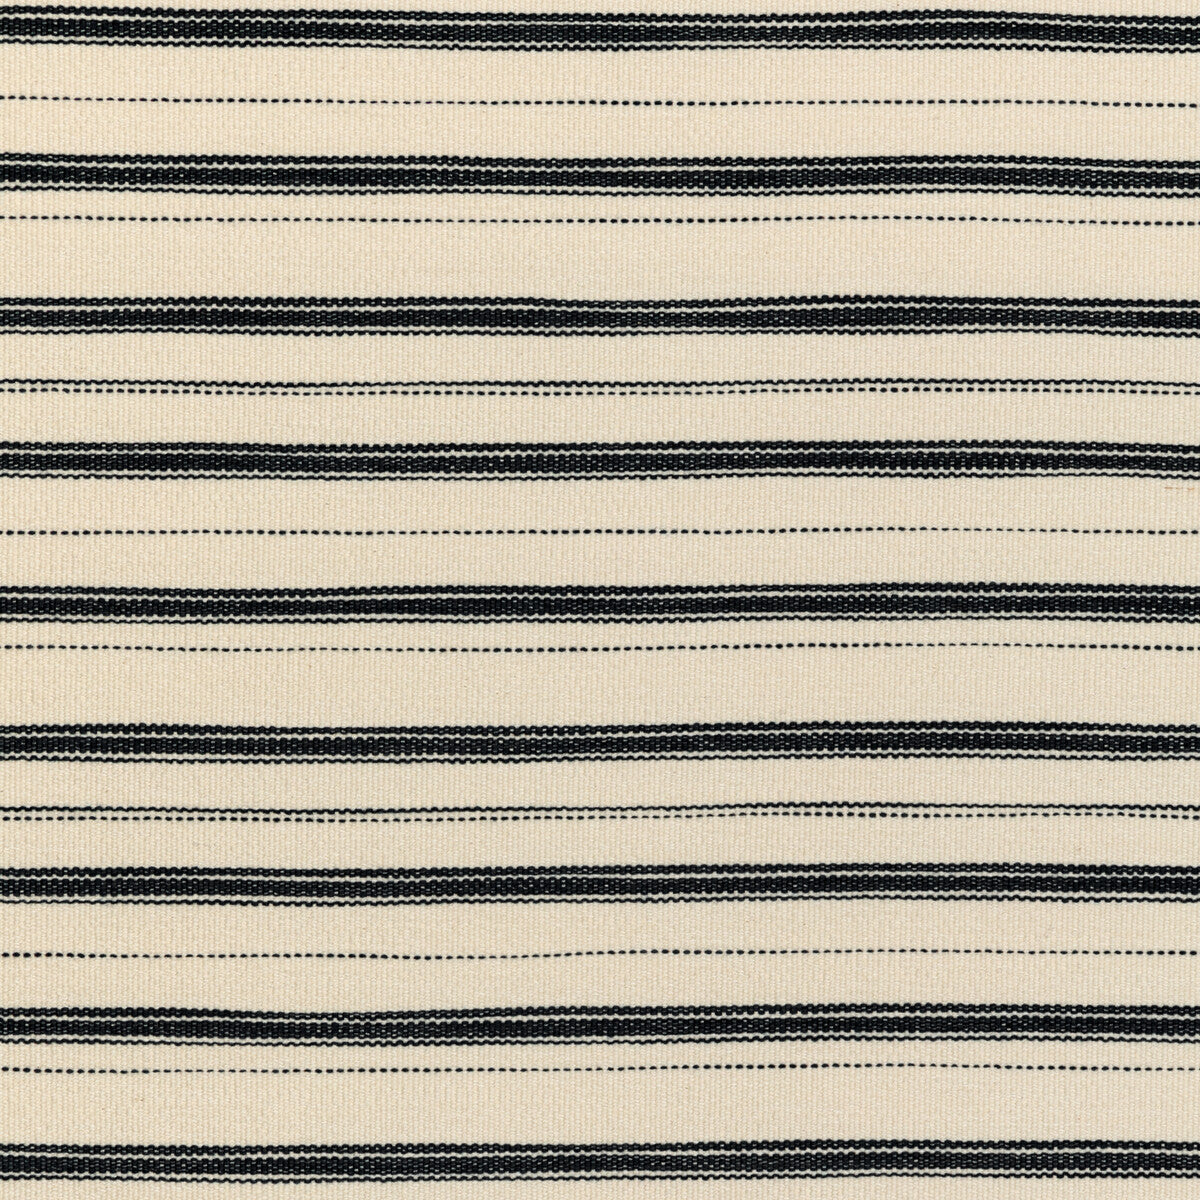 Meeker Stripe fabric in black color - pattern 2020209.81.0 - by Lee Jofa in the Breckenridge collection